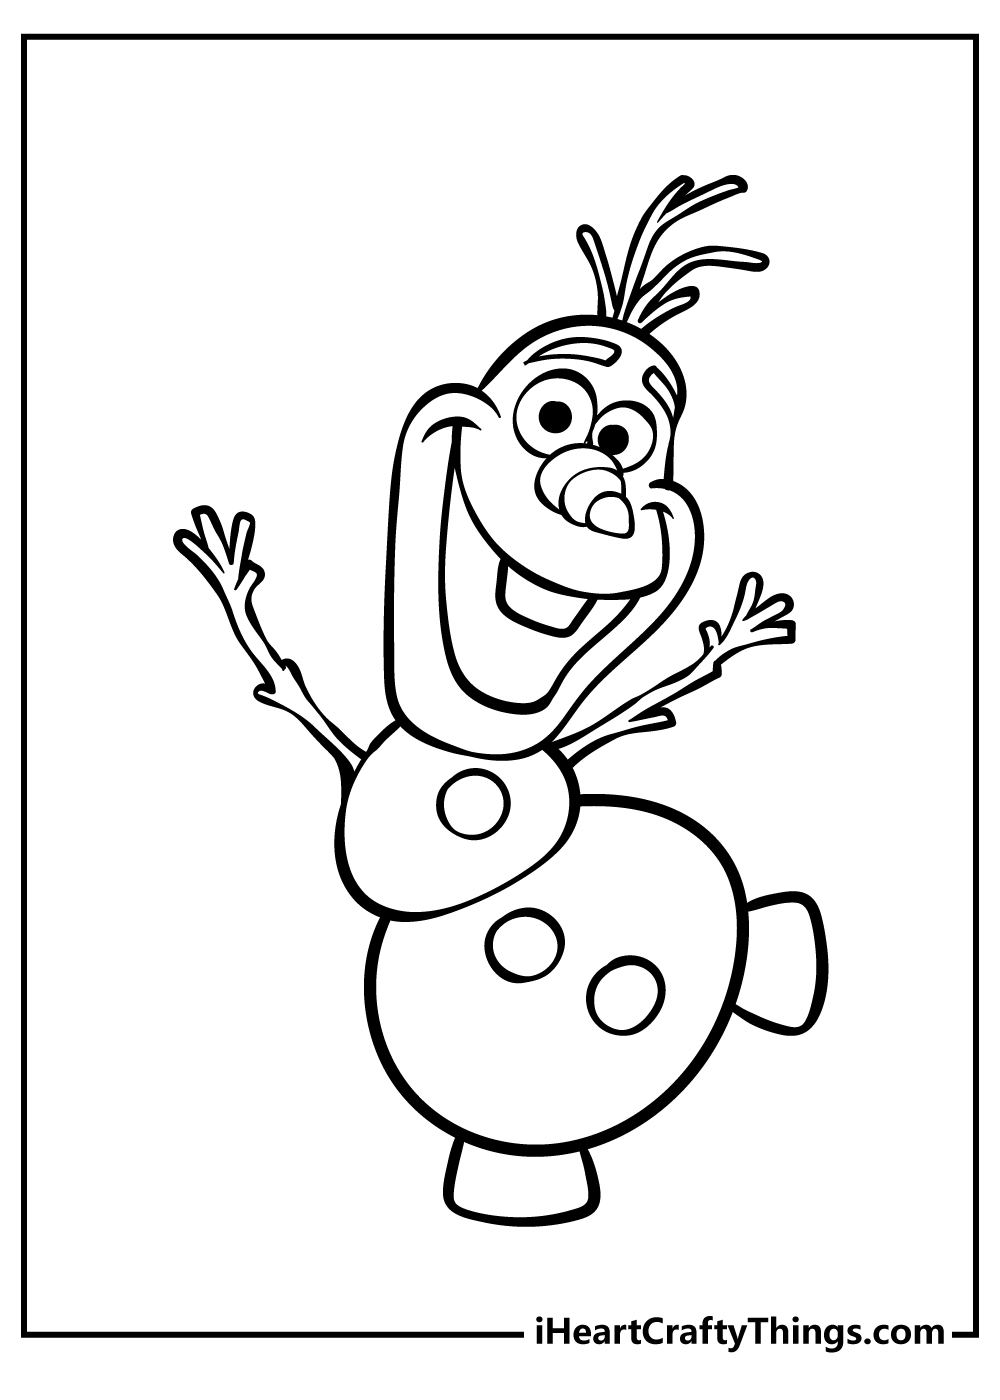 Frozen Coloring Pages For Preschoolers